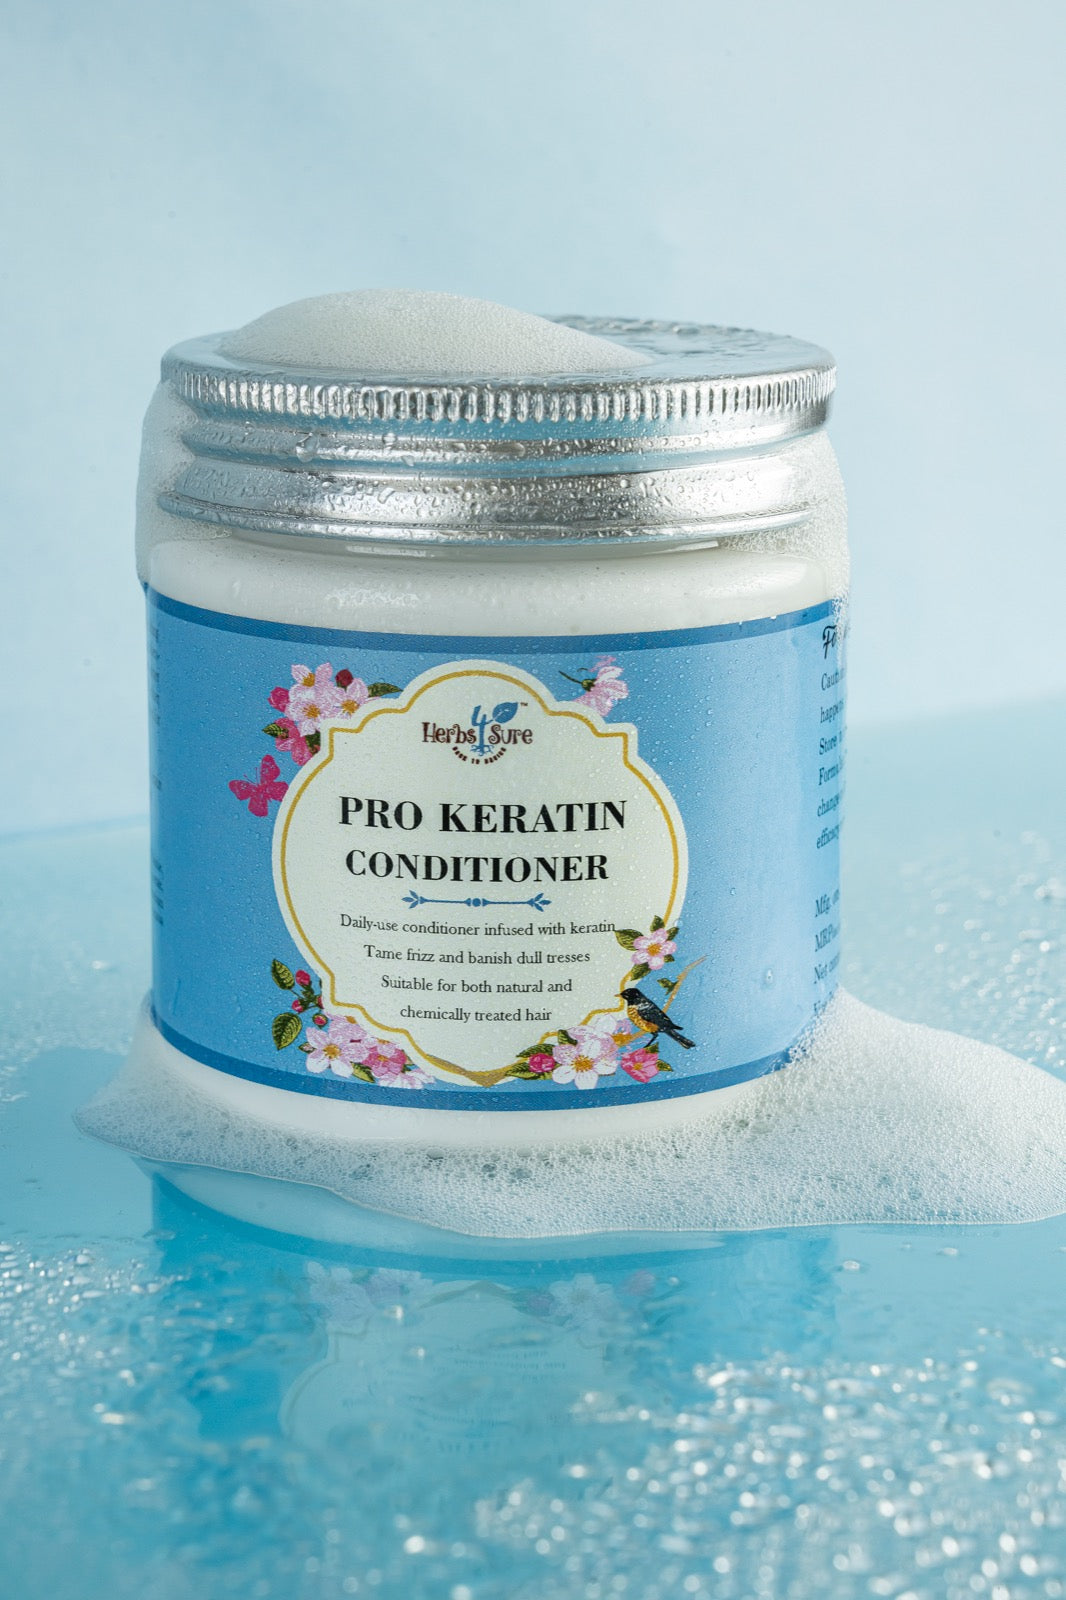 PRO KERATIN CONDITIONER- BRINGS SHINE AND KEEP HAIR STRAIGHT & HEALTHY